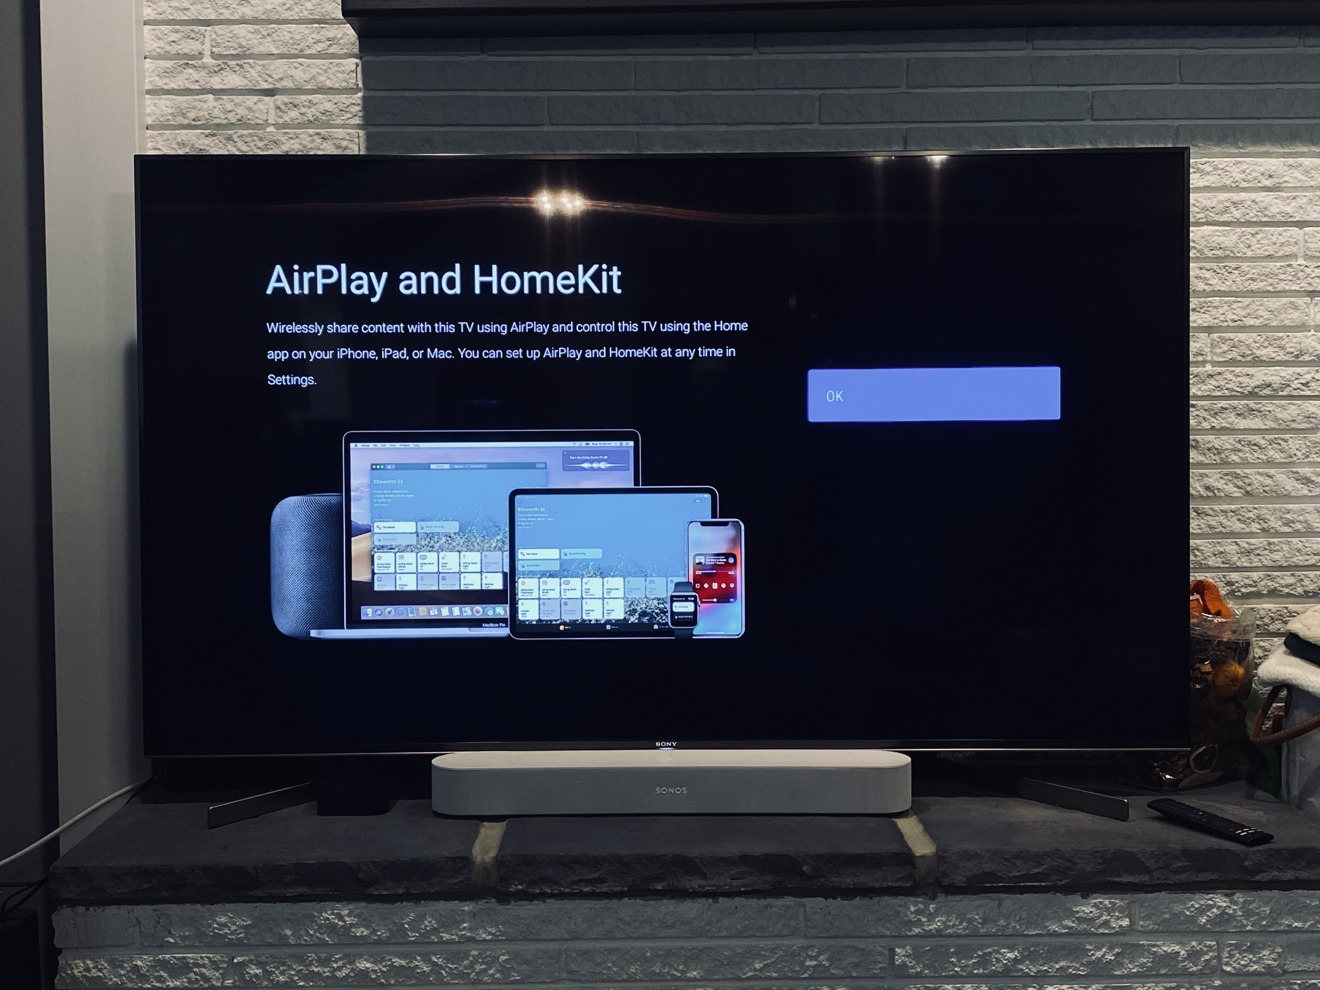 Hot And Airplay 2 On Sony Smart Tvs, Apple Ipad Screen Mirroring To Sony Tv